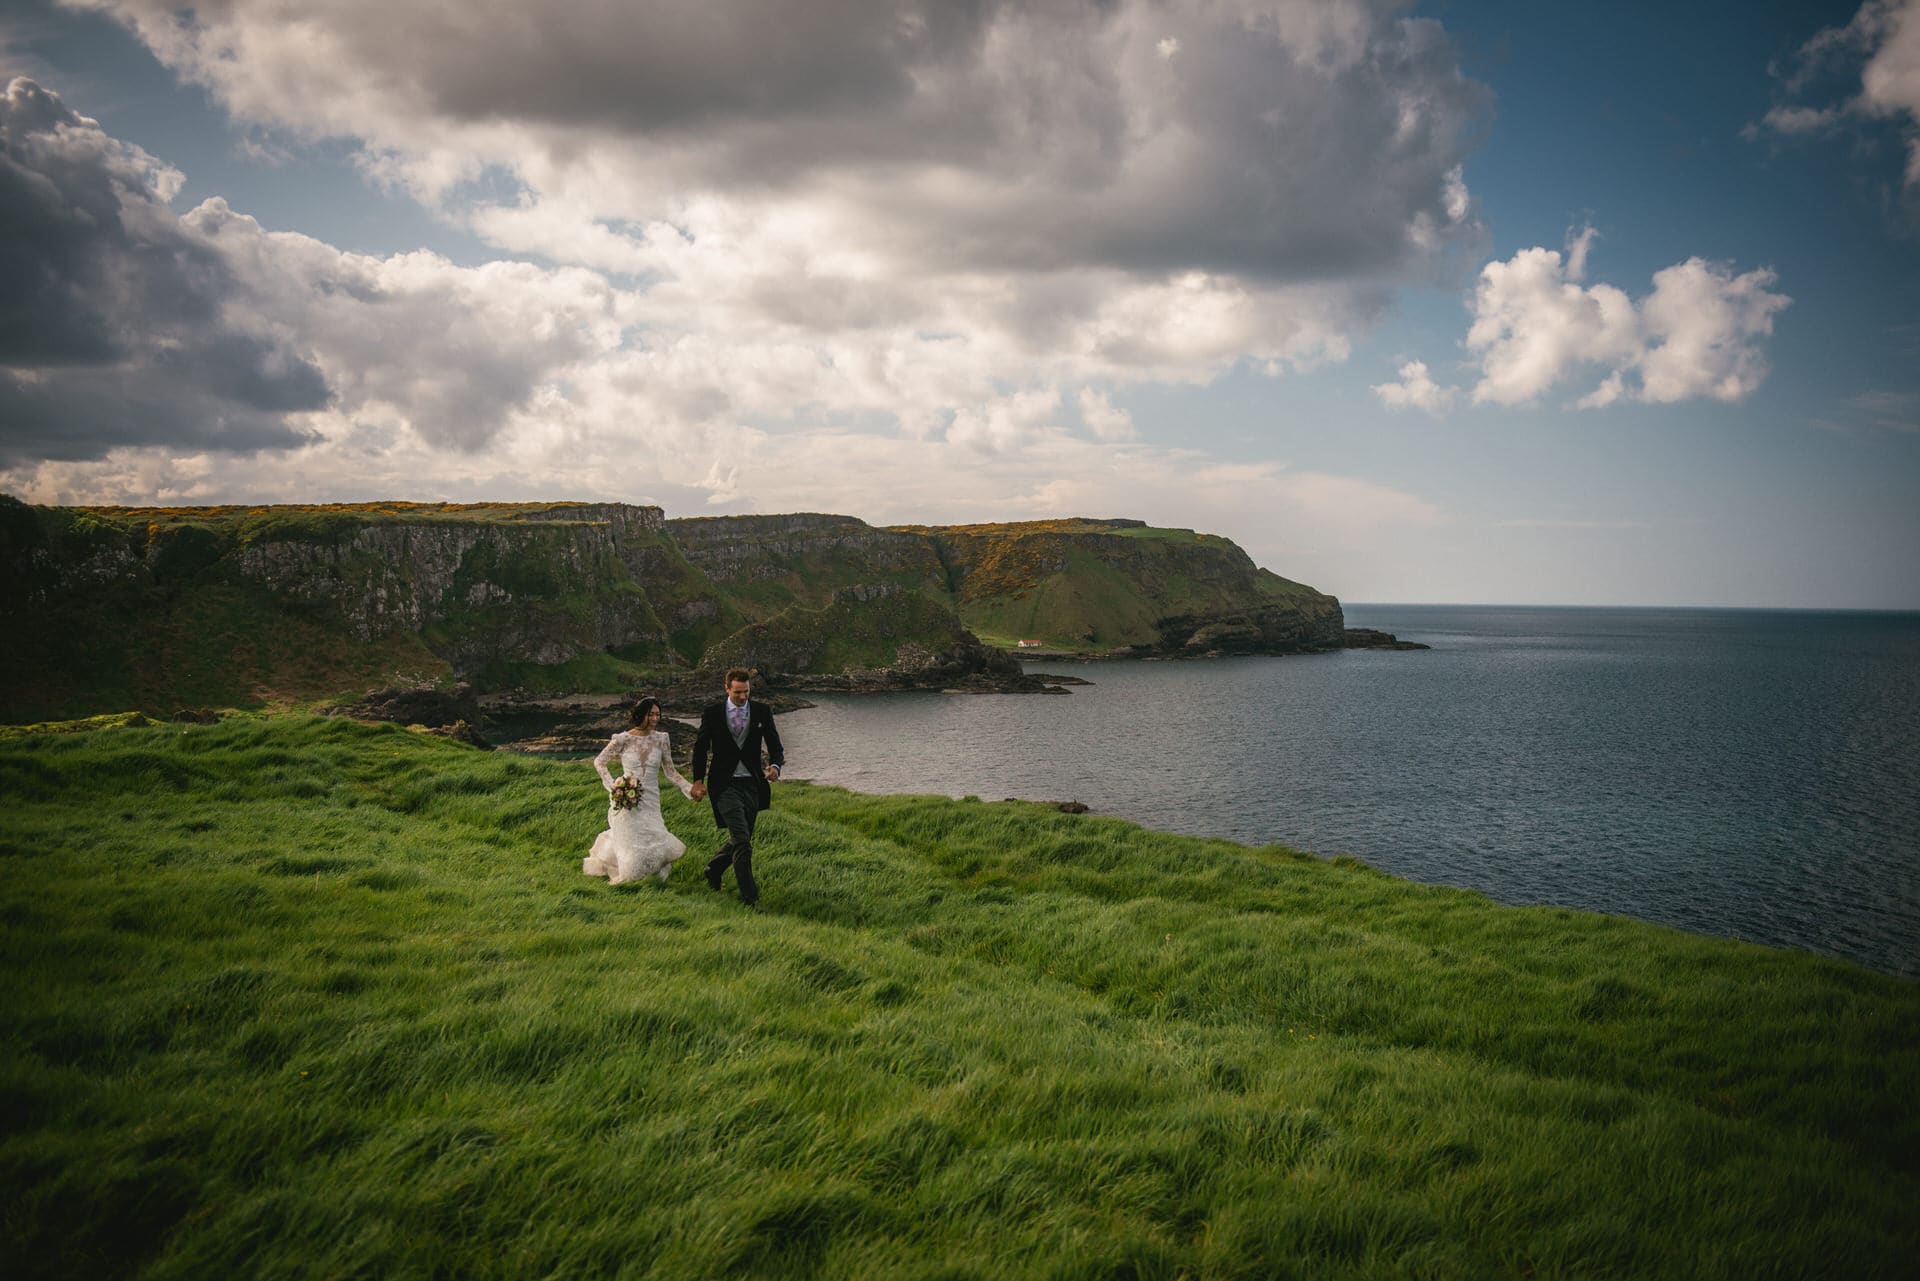 The couple embracing on a rocky cliff overlooking the sea during their Northern Ireland elopement.